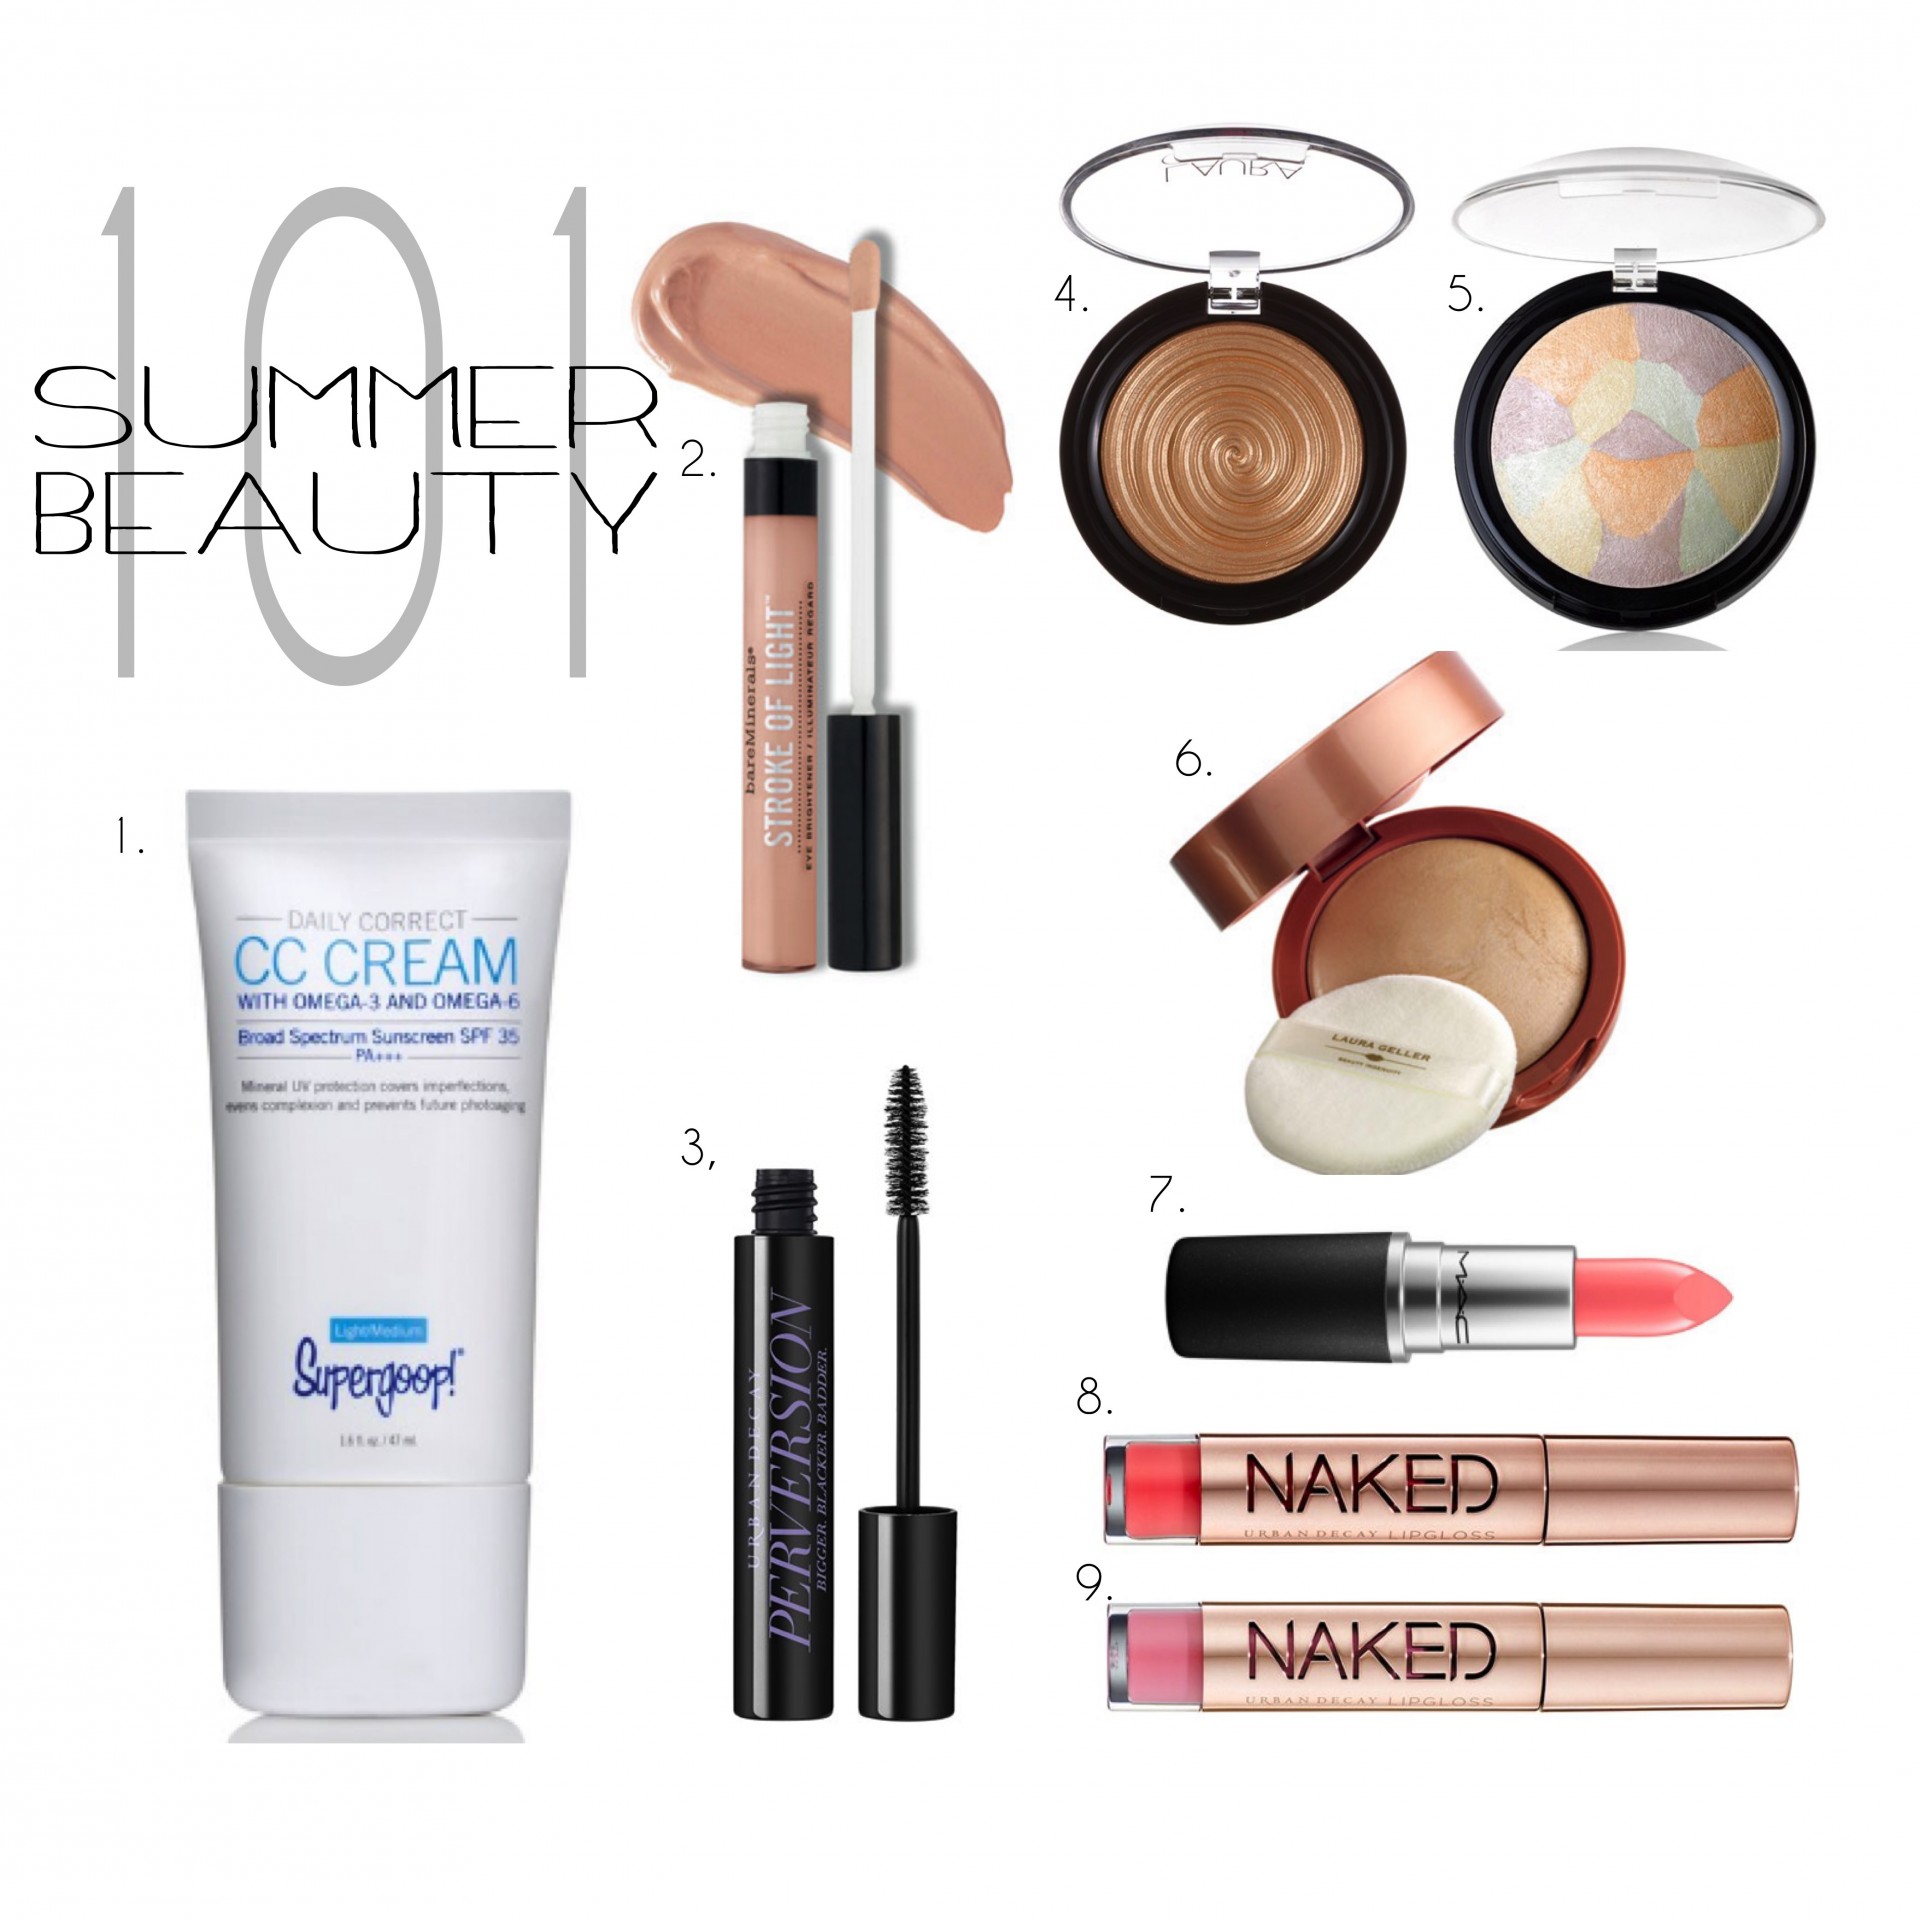 Summer Beauty Tips with summer make up tips from Laura Gellar, Make up with urban decay 